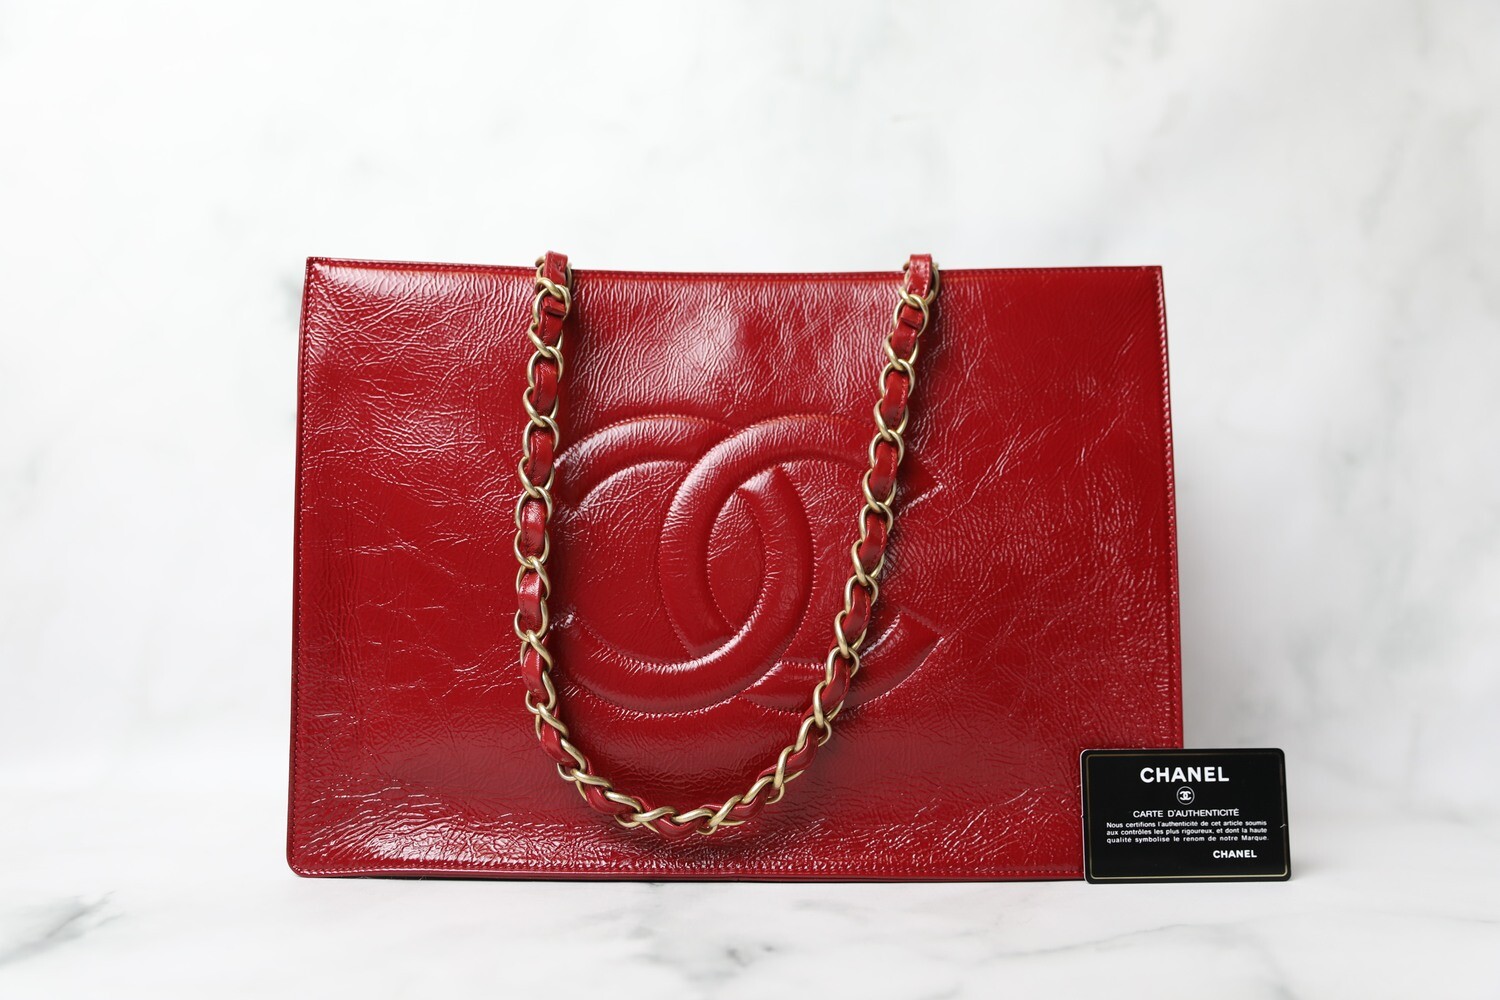 Chanel Bucket Bag, Red Shiny Calfskin with Gold Hardware, New in Box WA001